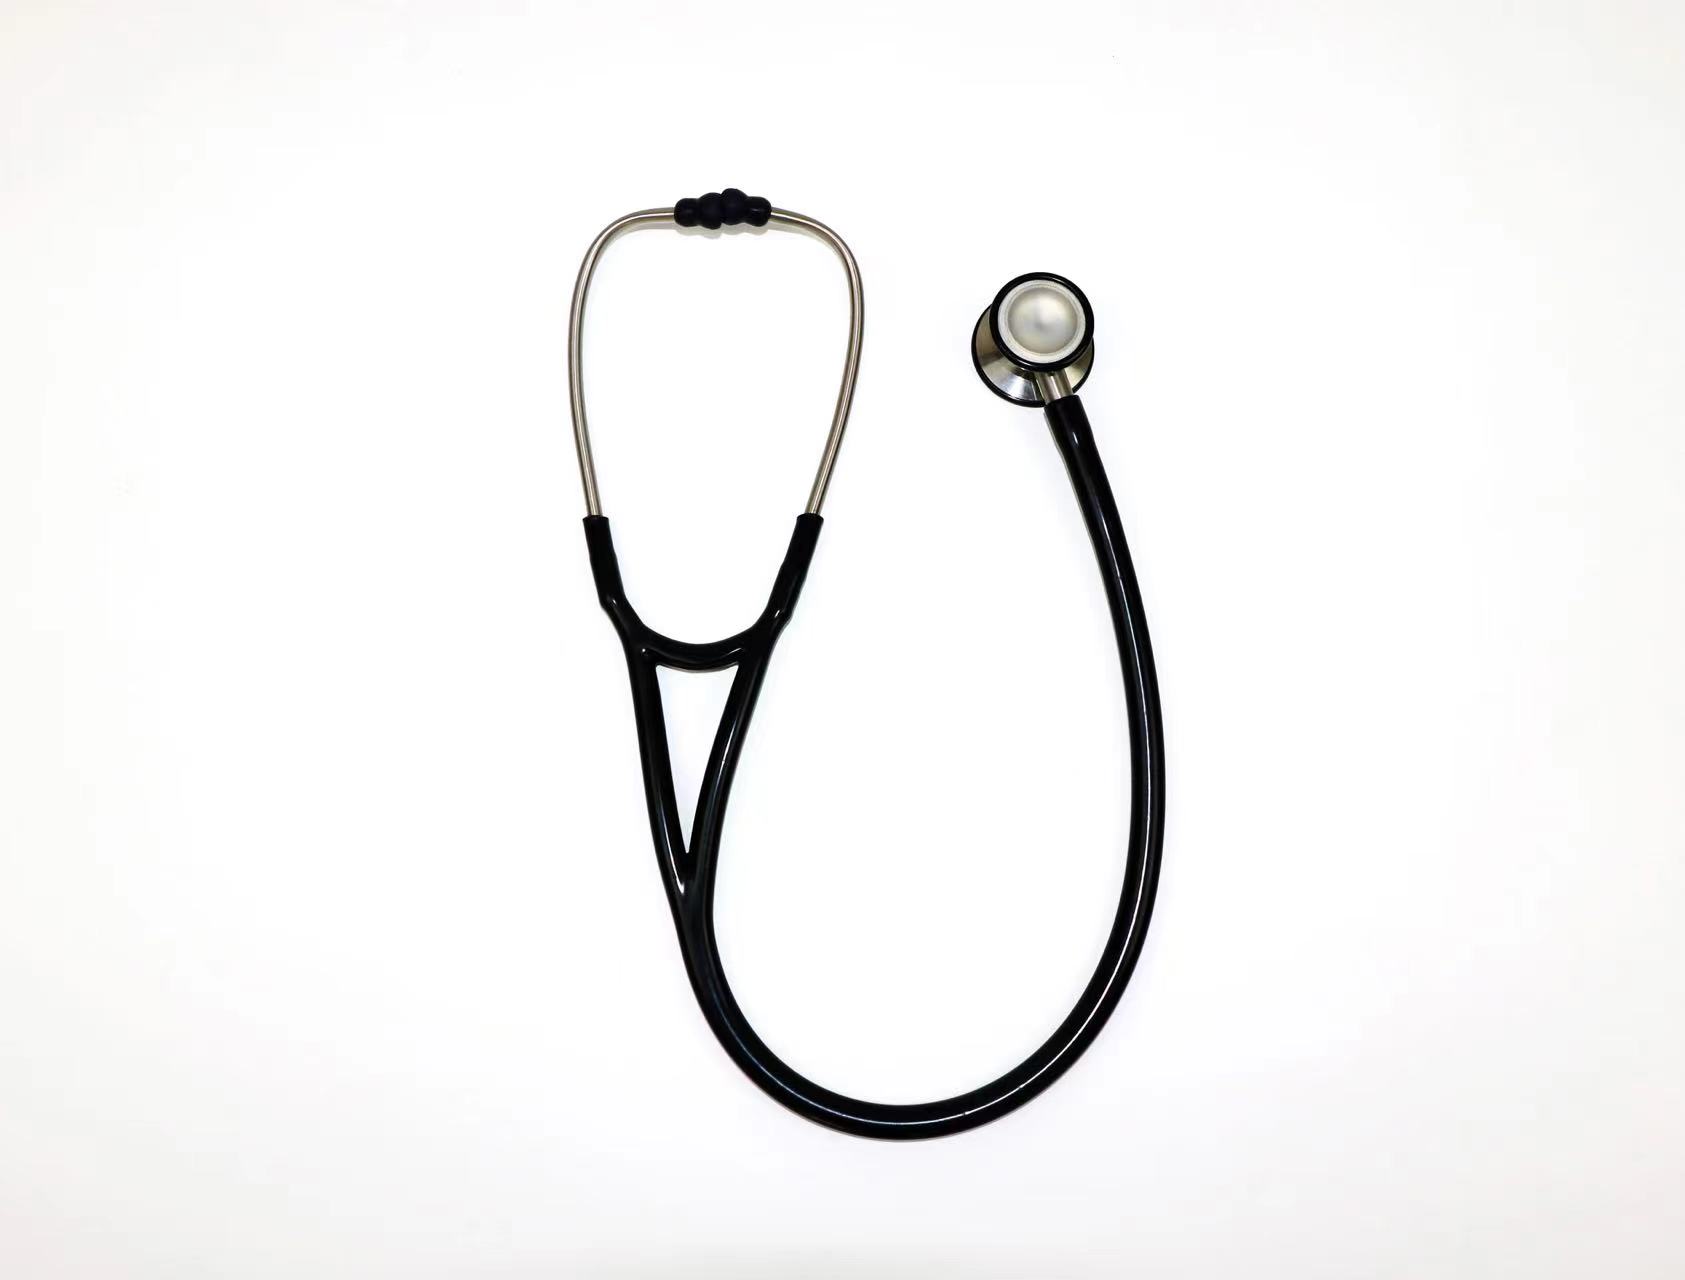 Cardiology stainless steel stethoscope（New design connected diaphragm）